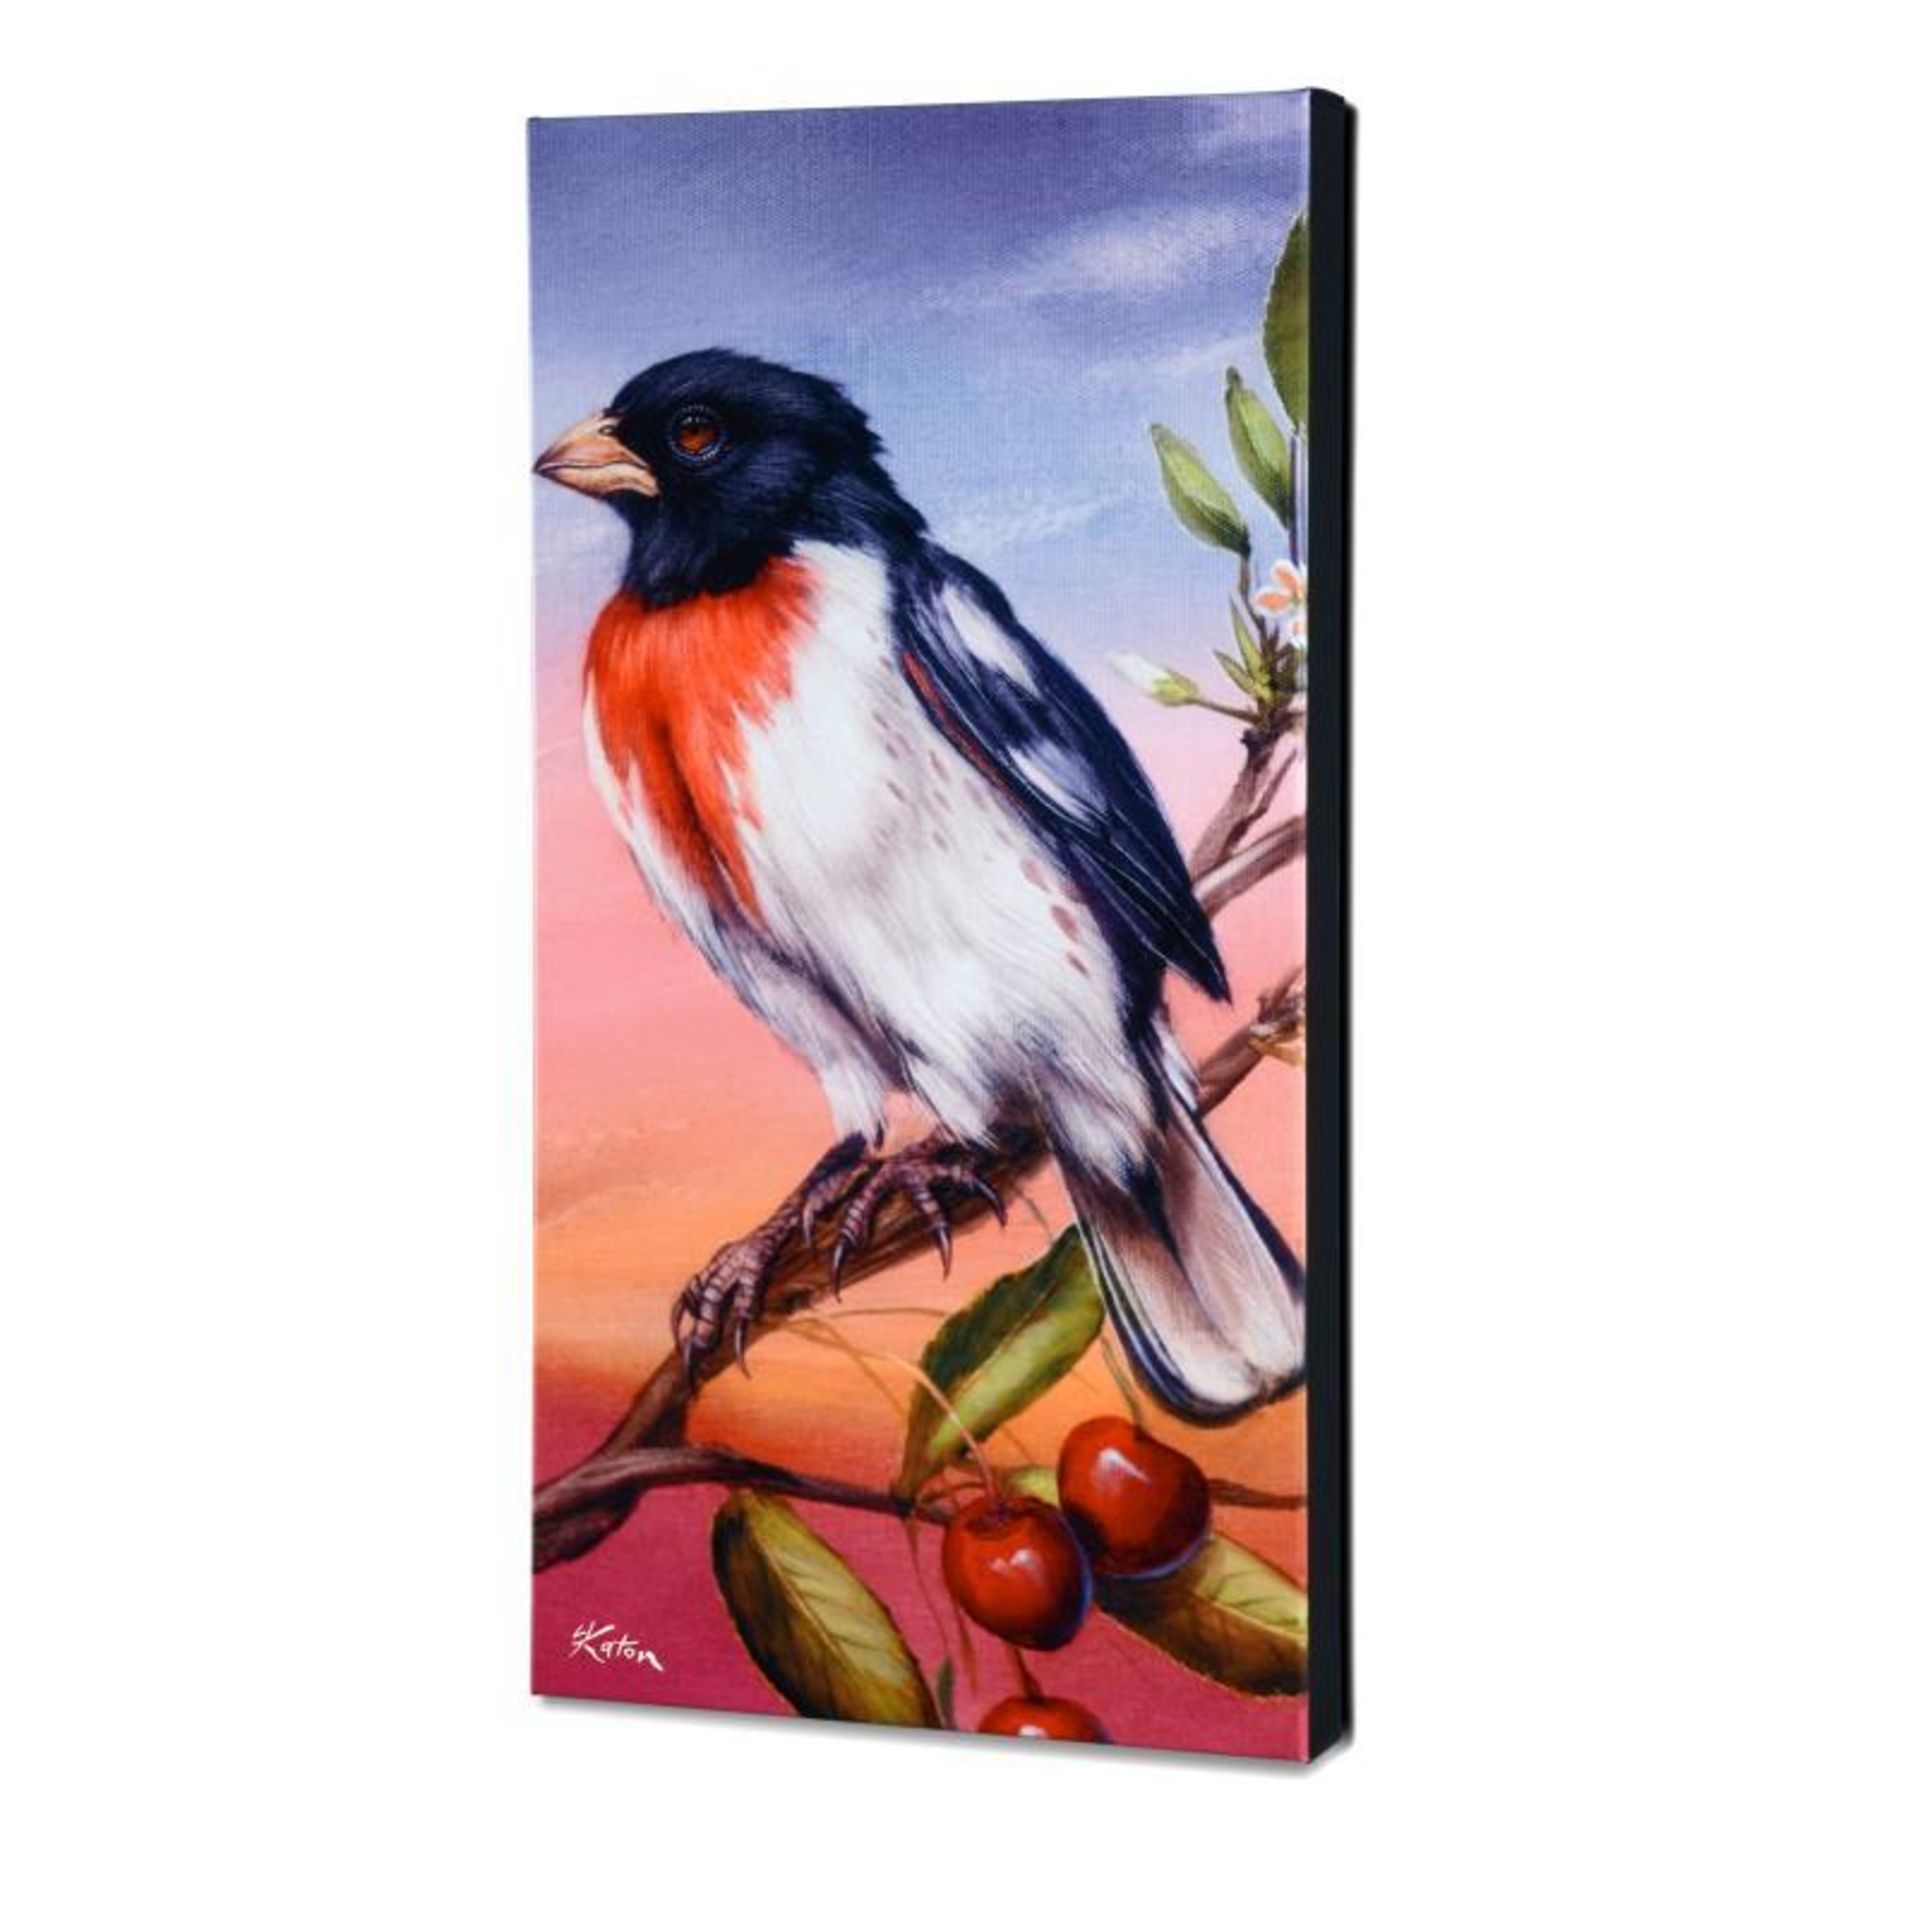 "Rose Breasted Grosbeak" Limited Edition Giclee on Canvas by Martin Katon, Numbe - Image 2 of 2